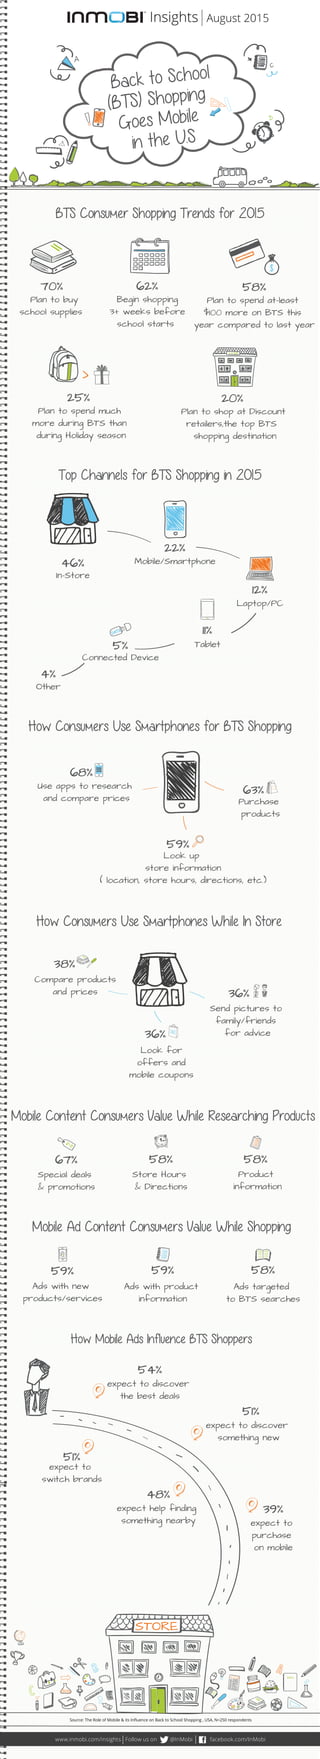 BTS Consumer Shopping Trends for 2015
Top Channels for BTS Shopping in 2015
How Consumers Use Smartphones for BTS Shopping
Back to School
(BTS) Shopping
Goes Mobile
in the U.S
STORE
$
25%
Plan to spend much
more during BTS than
during Holiday season
58%
Plan to spend at-least
$100 more on BTS this
year compared to last year
62%
Begin shopping
3+ weeks before
school starts
20%
Plan to shop at Discount
retailers,the top BTS
shopping destination
70%
Plan to buy
school supplies
How Mobile Ads Influence BTS Shoppers
expect to discover
the best deals
expect to
switch brands
expect to discover
something new
expect to
purchase
on mobile
expect help finding
something nearby
54%
51%
51%
48%
39%
Source: The Role of Mobile & its Inﬂuence on Back to School Shopping , USA, N=250 respondents
Laptop/PC
12%
Mobile/Smartphone
22%
Connected Device
5%
In-Store
Other
4%
46%
Tablet
11%
Special deals
& promotions
67%
Store Hours
& Directions
58%
Product
information
58%
Ads with new
products/services
59%
Ads with product
information
59%
Ads targeted
to BTS searches
58%
Insights August 2015
Mobile Content Consumers Value While Researching Products
Mobile Ad Content Consumers Value While Shopping
Use apps to research
and compare prices
68%
Purchase
products
63%
Look up
store information
( location, store hours, directions, etc.)
59%
How Consumers Use Smartphones While In Store
Compare products
and prices
38%
Send pictures to
family/friends
for advice
36%
Look for
offers and
mobile coupons
36%
www.inmobi.com/insights Follow us on @InMobi facebook.com/InMobi
 